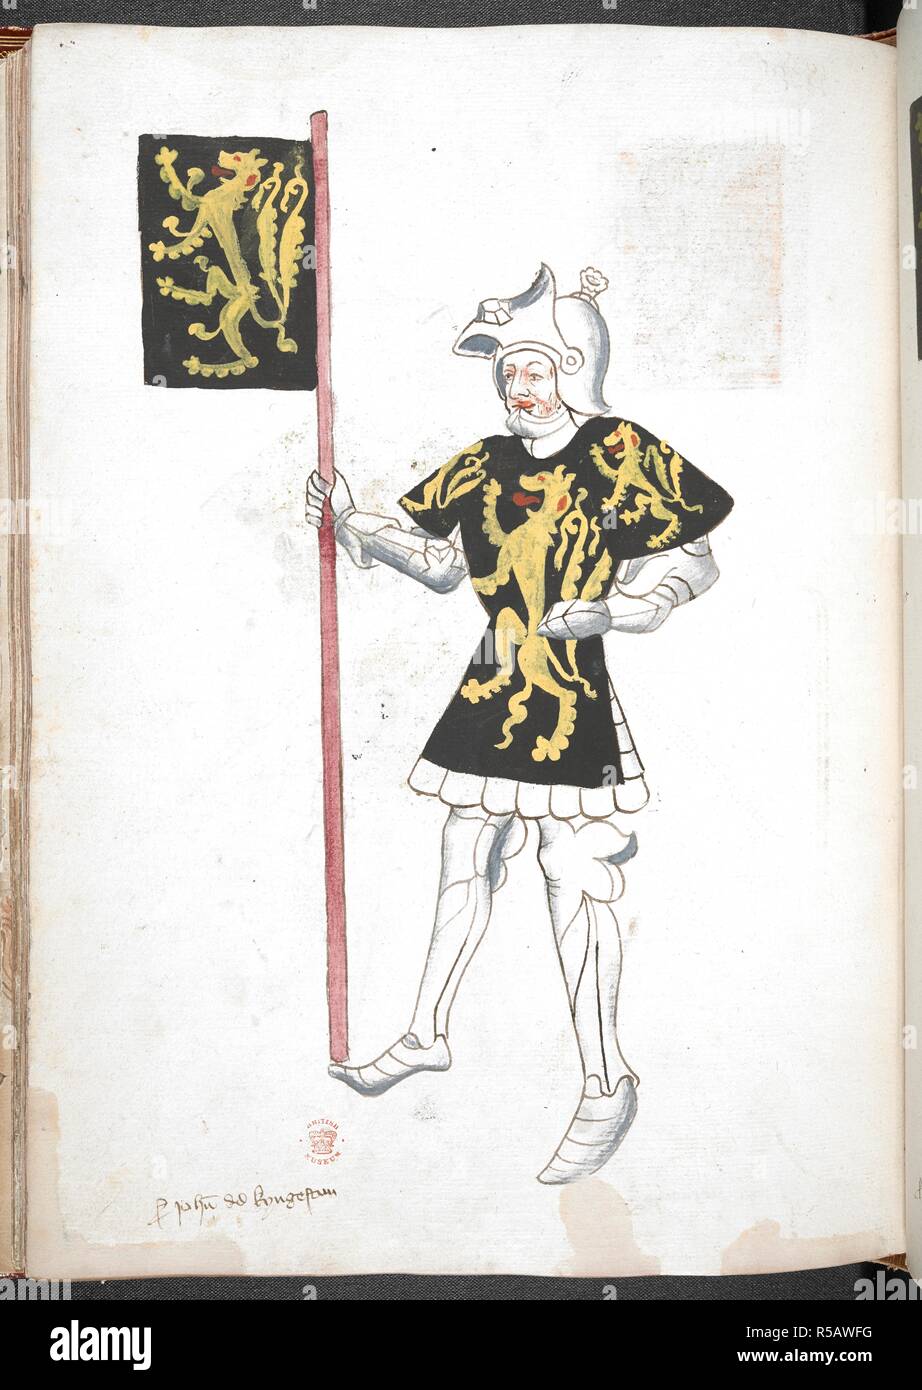 Knight, in armour and tabard, holding a sword and a standard with banner and arms. Legh's Men of Arms (manuscript also known as Sir Thomas Holme's Book of Arms). Part 3 ff. 41-112. England, S. E. (probably London). Last quarter of the 15th century or 1st quarter of the 16th century. Numerous coloured drawings of knights in armour and tabard. Source: Harley 4205 f.90v. Language: French (names of the knights). Gothic cursive. Author: Legh, Roger. Stock Photo